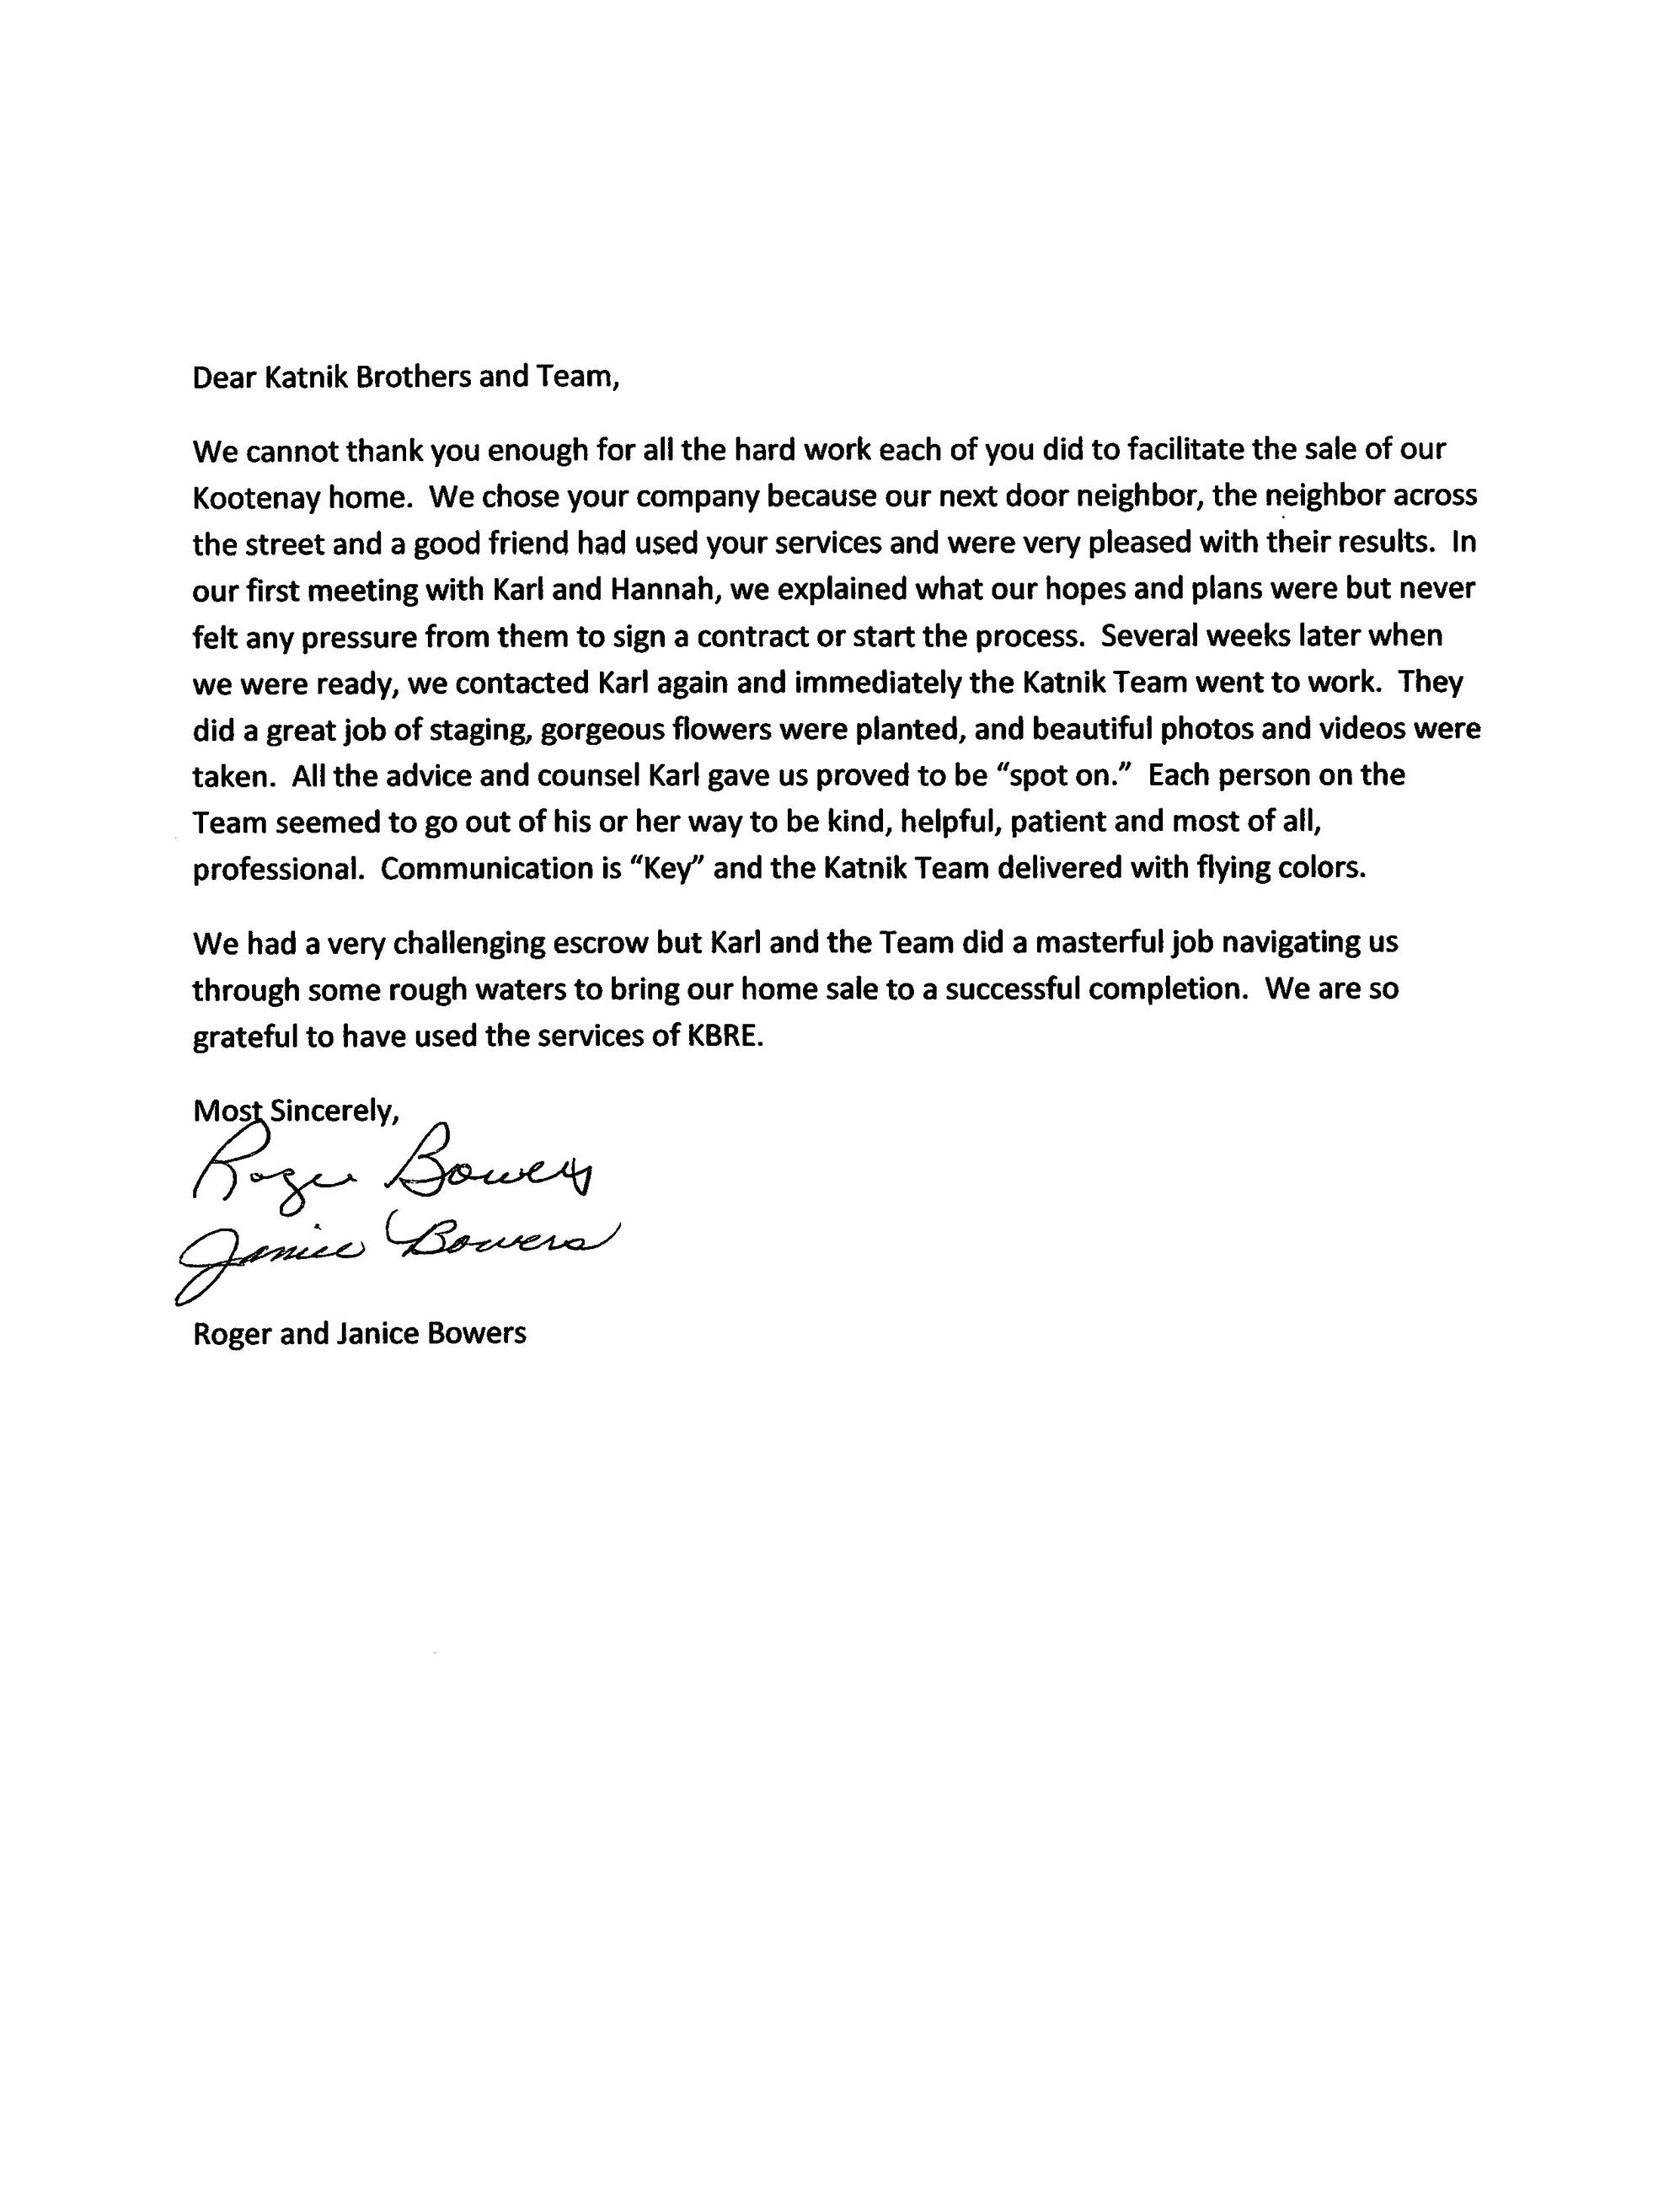 Roger & Janice Bowers Letter